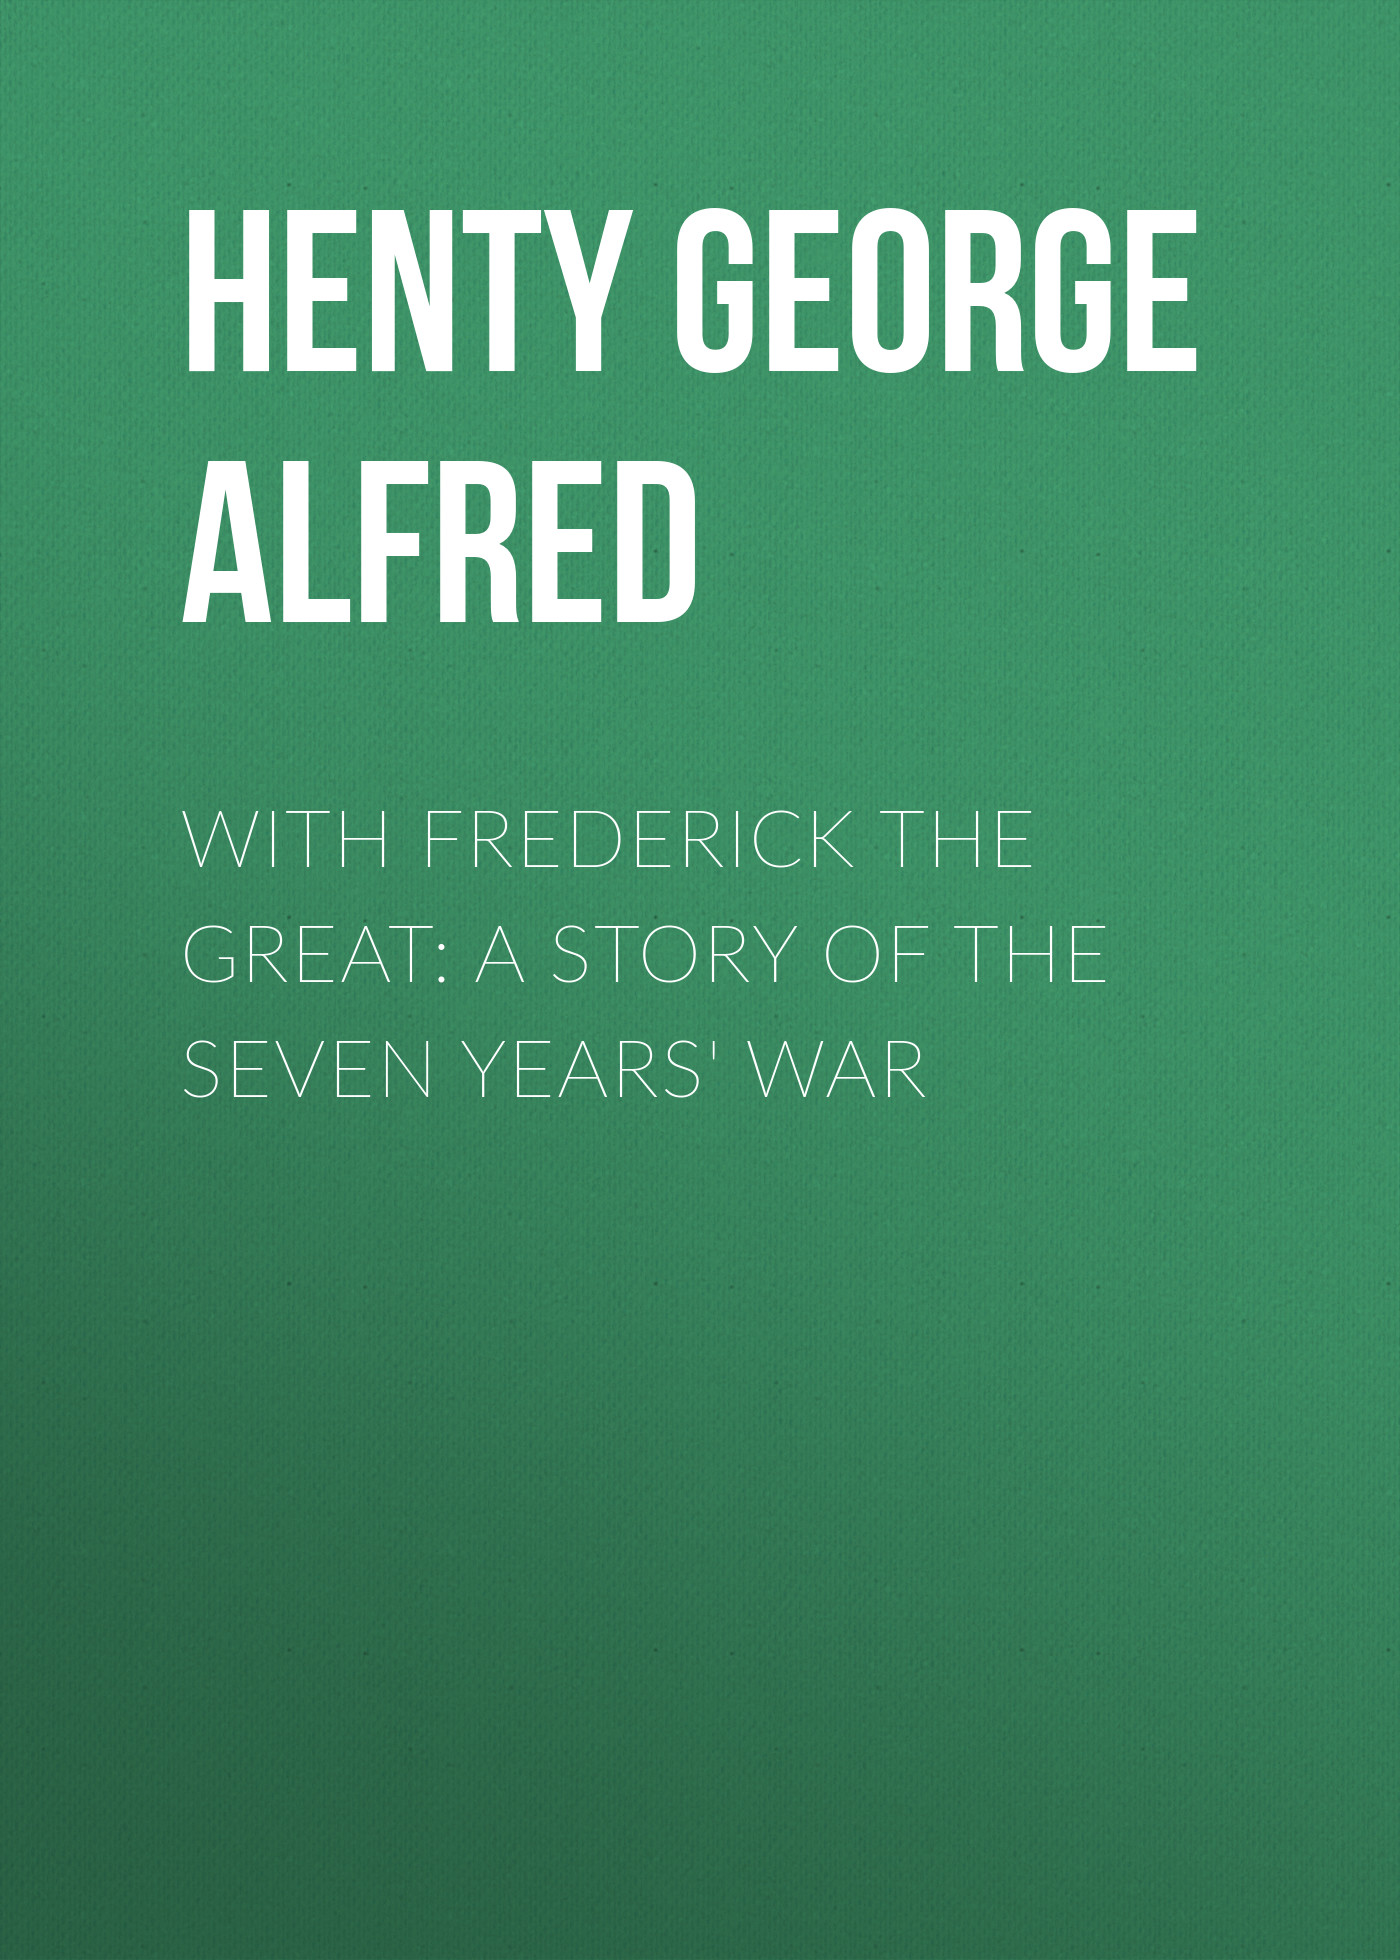 With Frederick the Great: A Story of the Seven Years'War